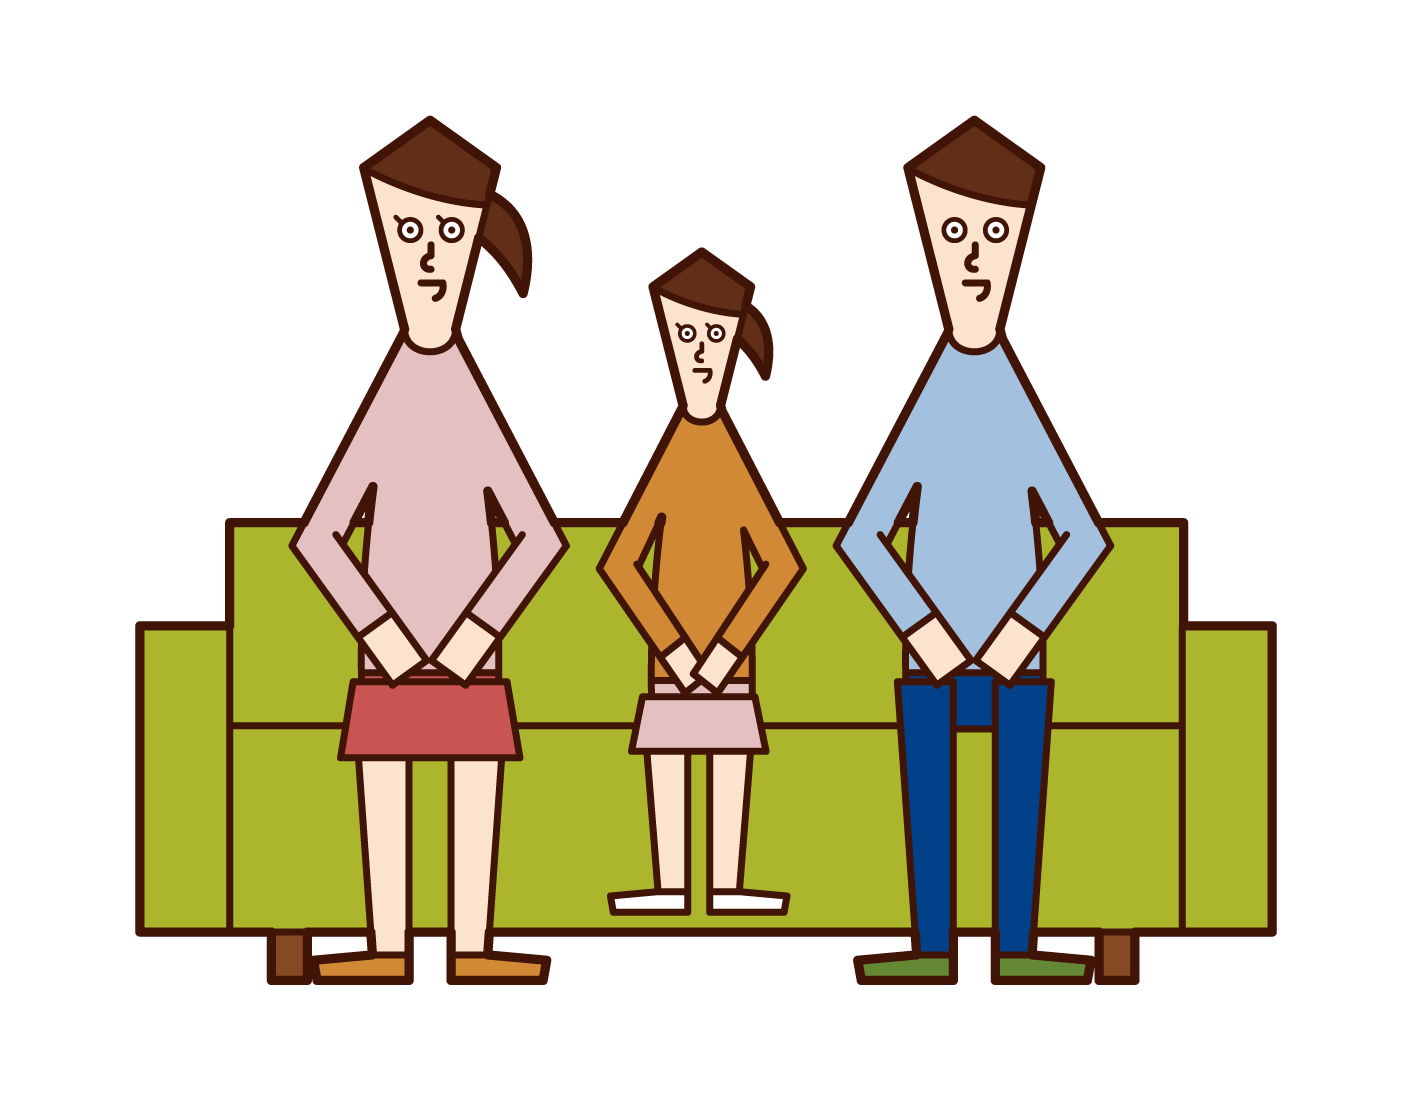 Illustration of a family of three